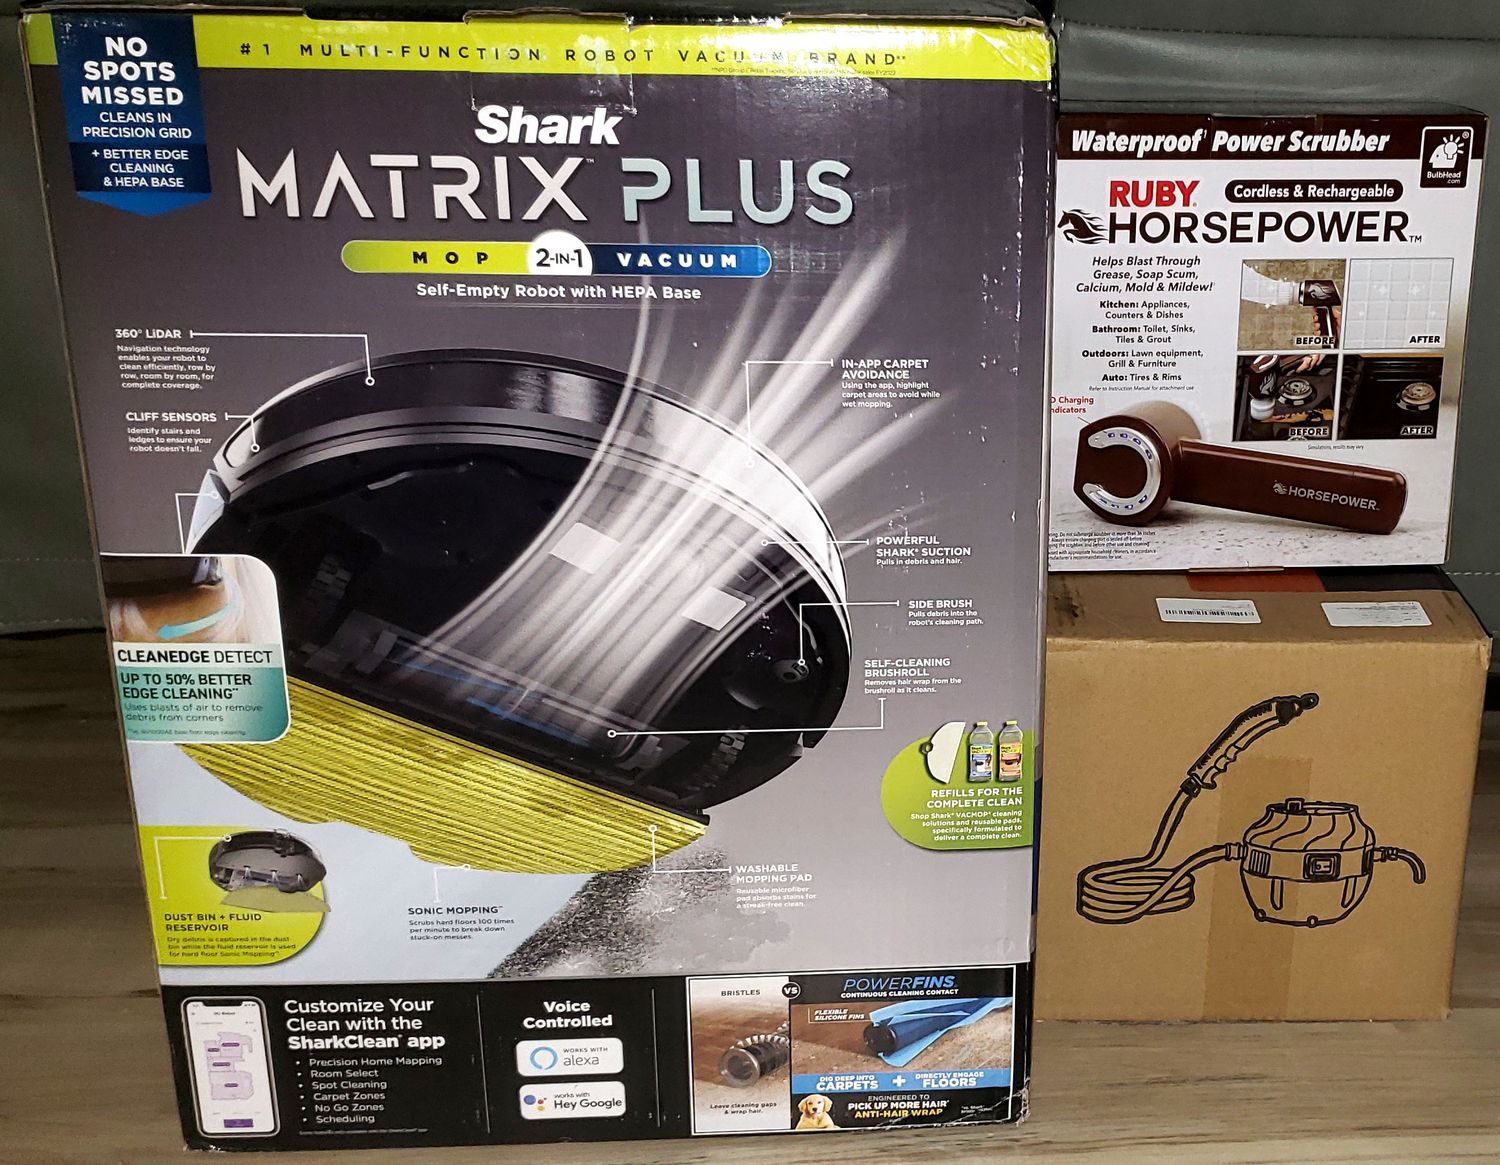 Super 8 Raffle Ticket
Prize #8 Shark Vacuum/mop, Steamer, Scrubber donated by ABC Birds